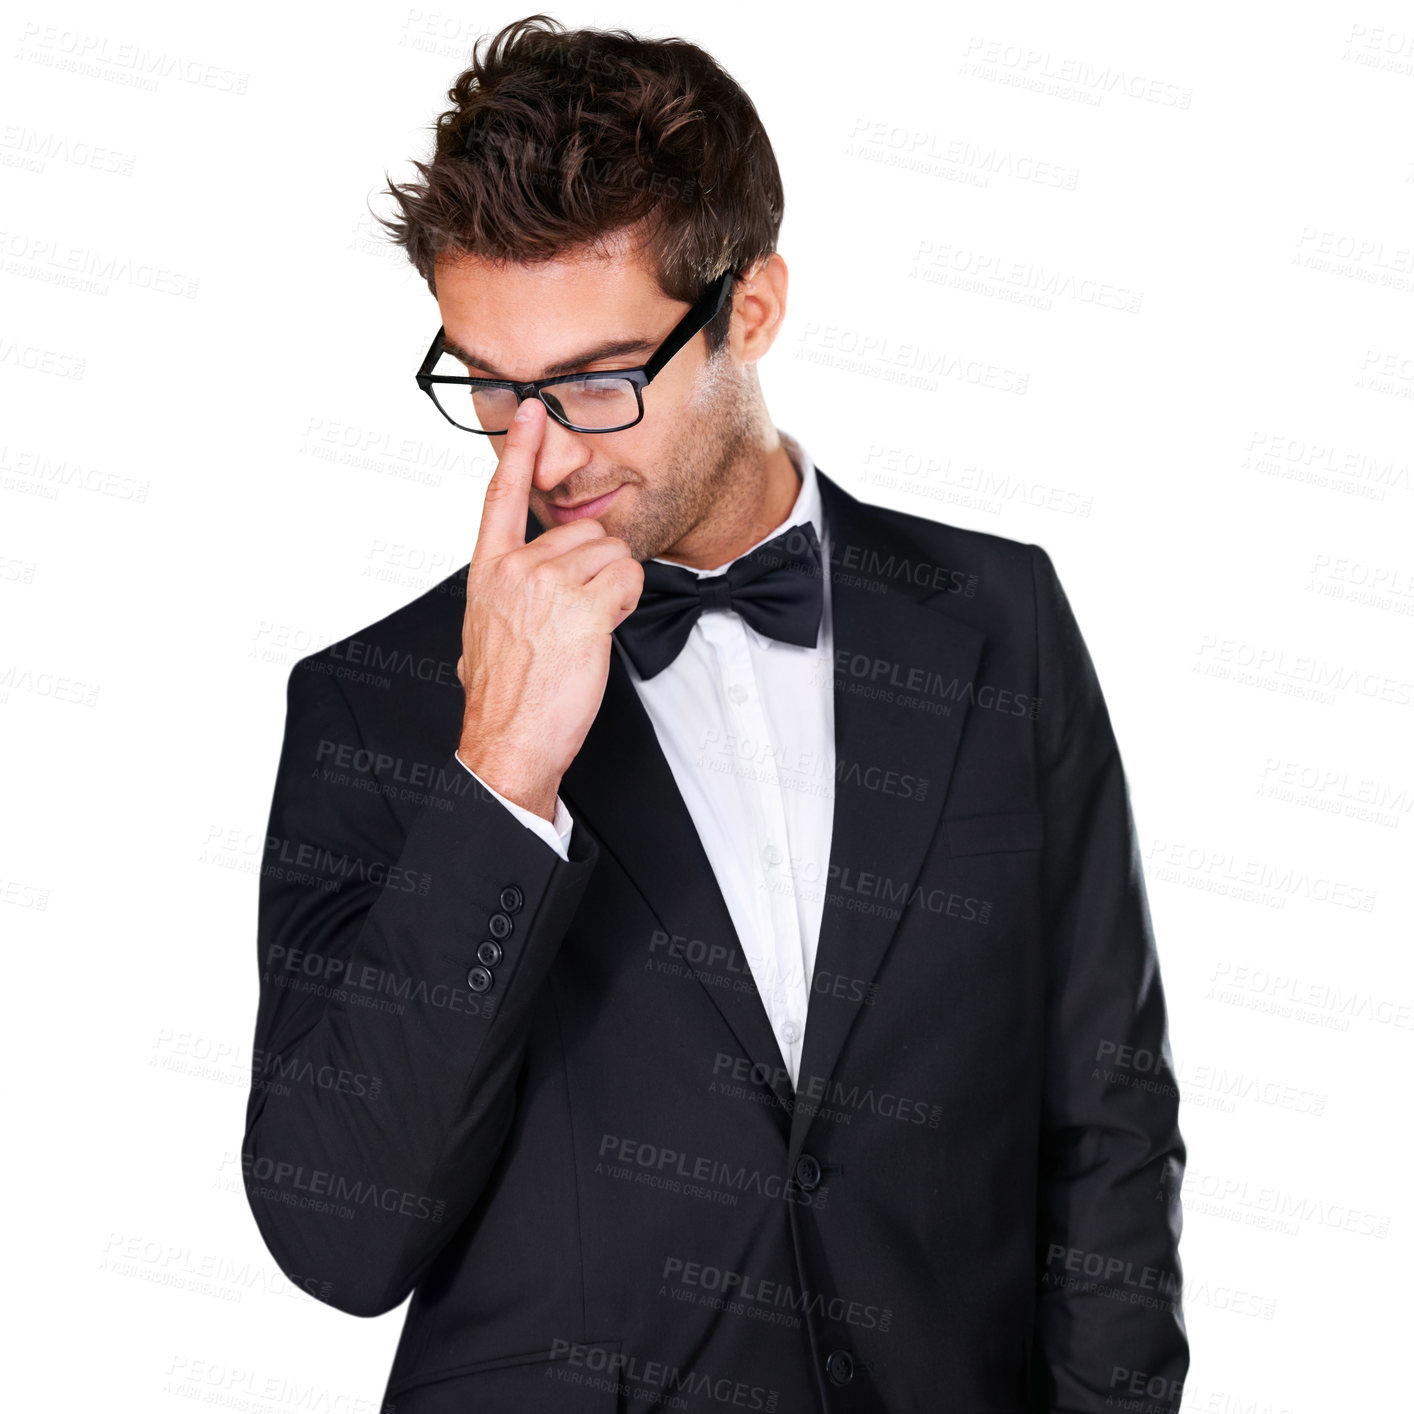 Buy stock photo Studio, fashion and man with tuxedo, glasses and formal evening wear for elegant outfit on white background. Suit, confidence and aesthetic model with classy outfit, fancy clothes and fix eyeglasses